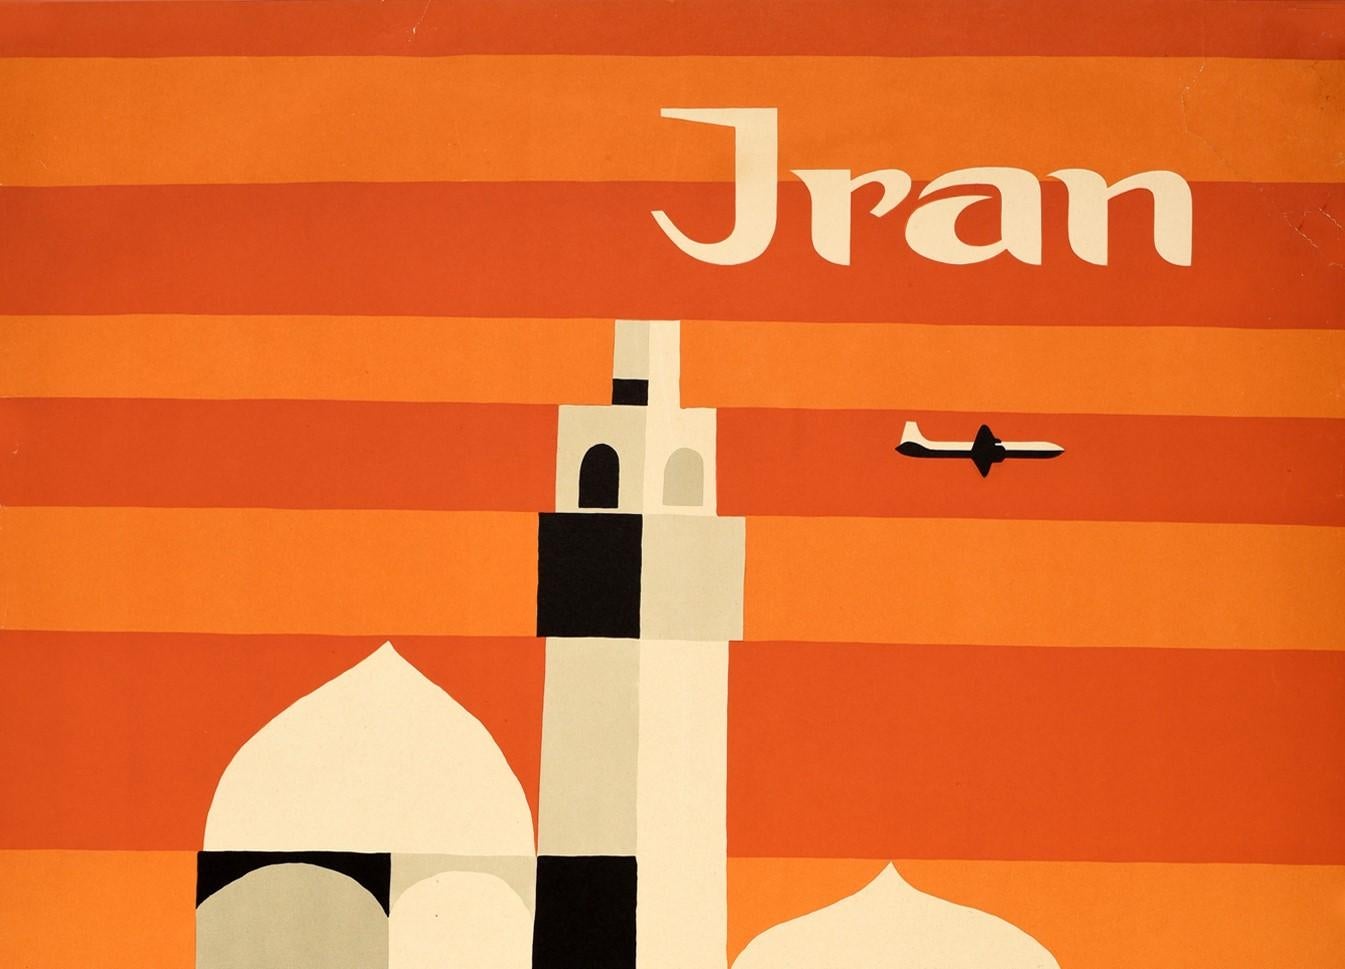 Original vintage air travel poster advertising flights to Iran issued by Alitalia featuring a great graphic design depicting traditional Iranian architecture in shades of black and white against a striped orange background with a plane flying in the